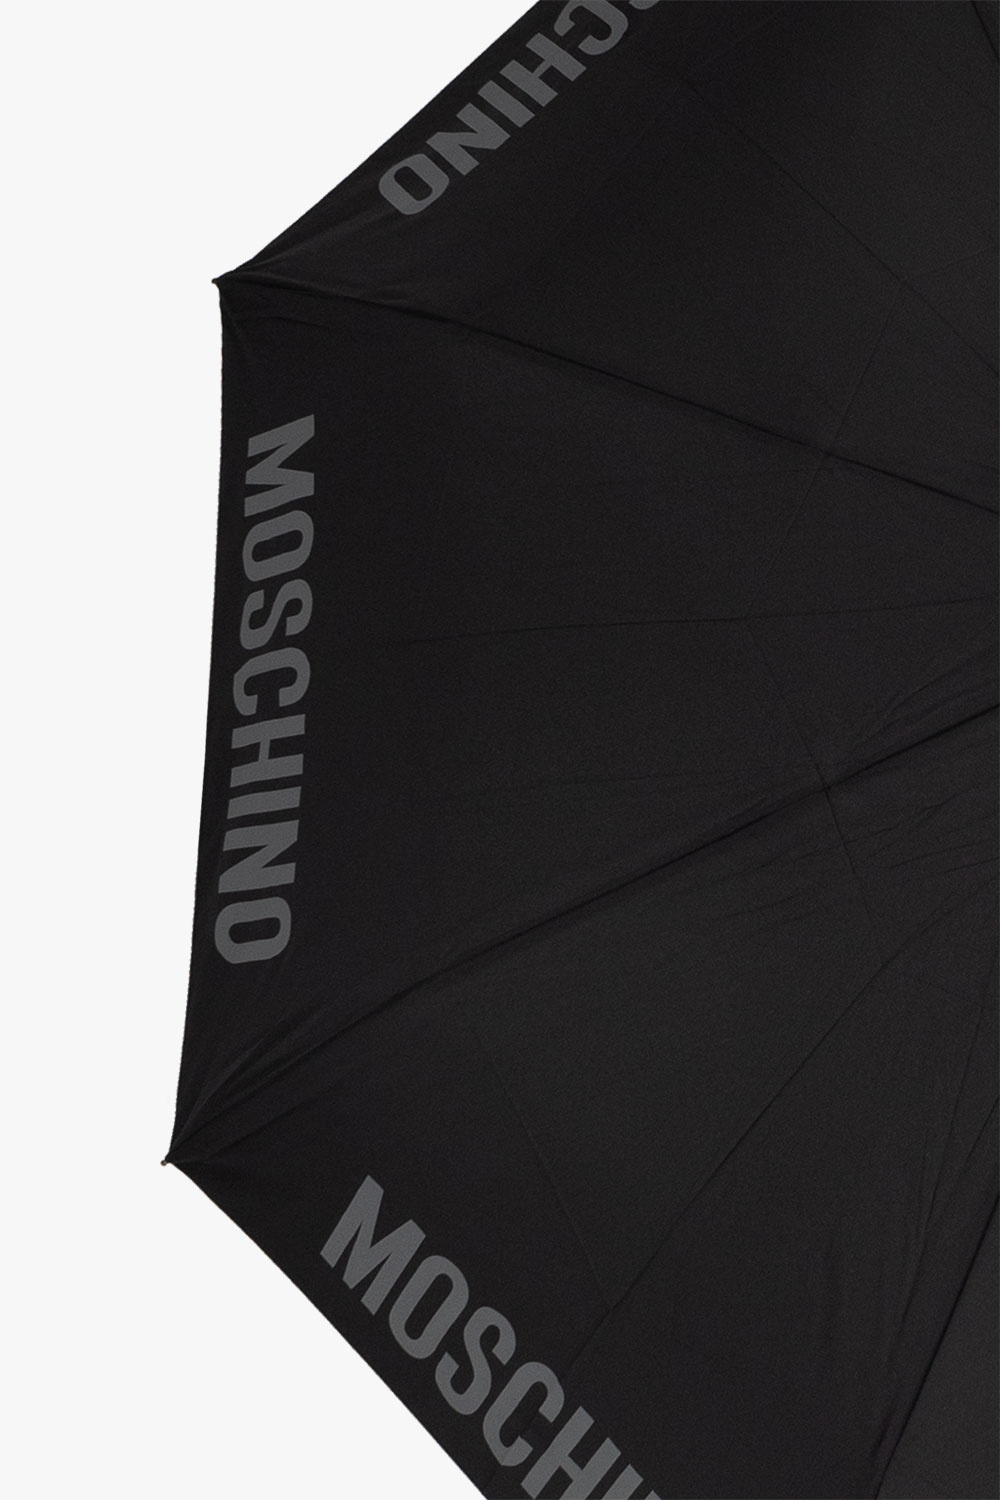 Moschino Download the latest version of the app